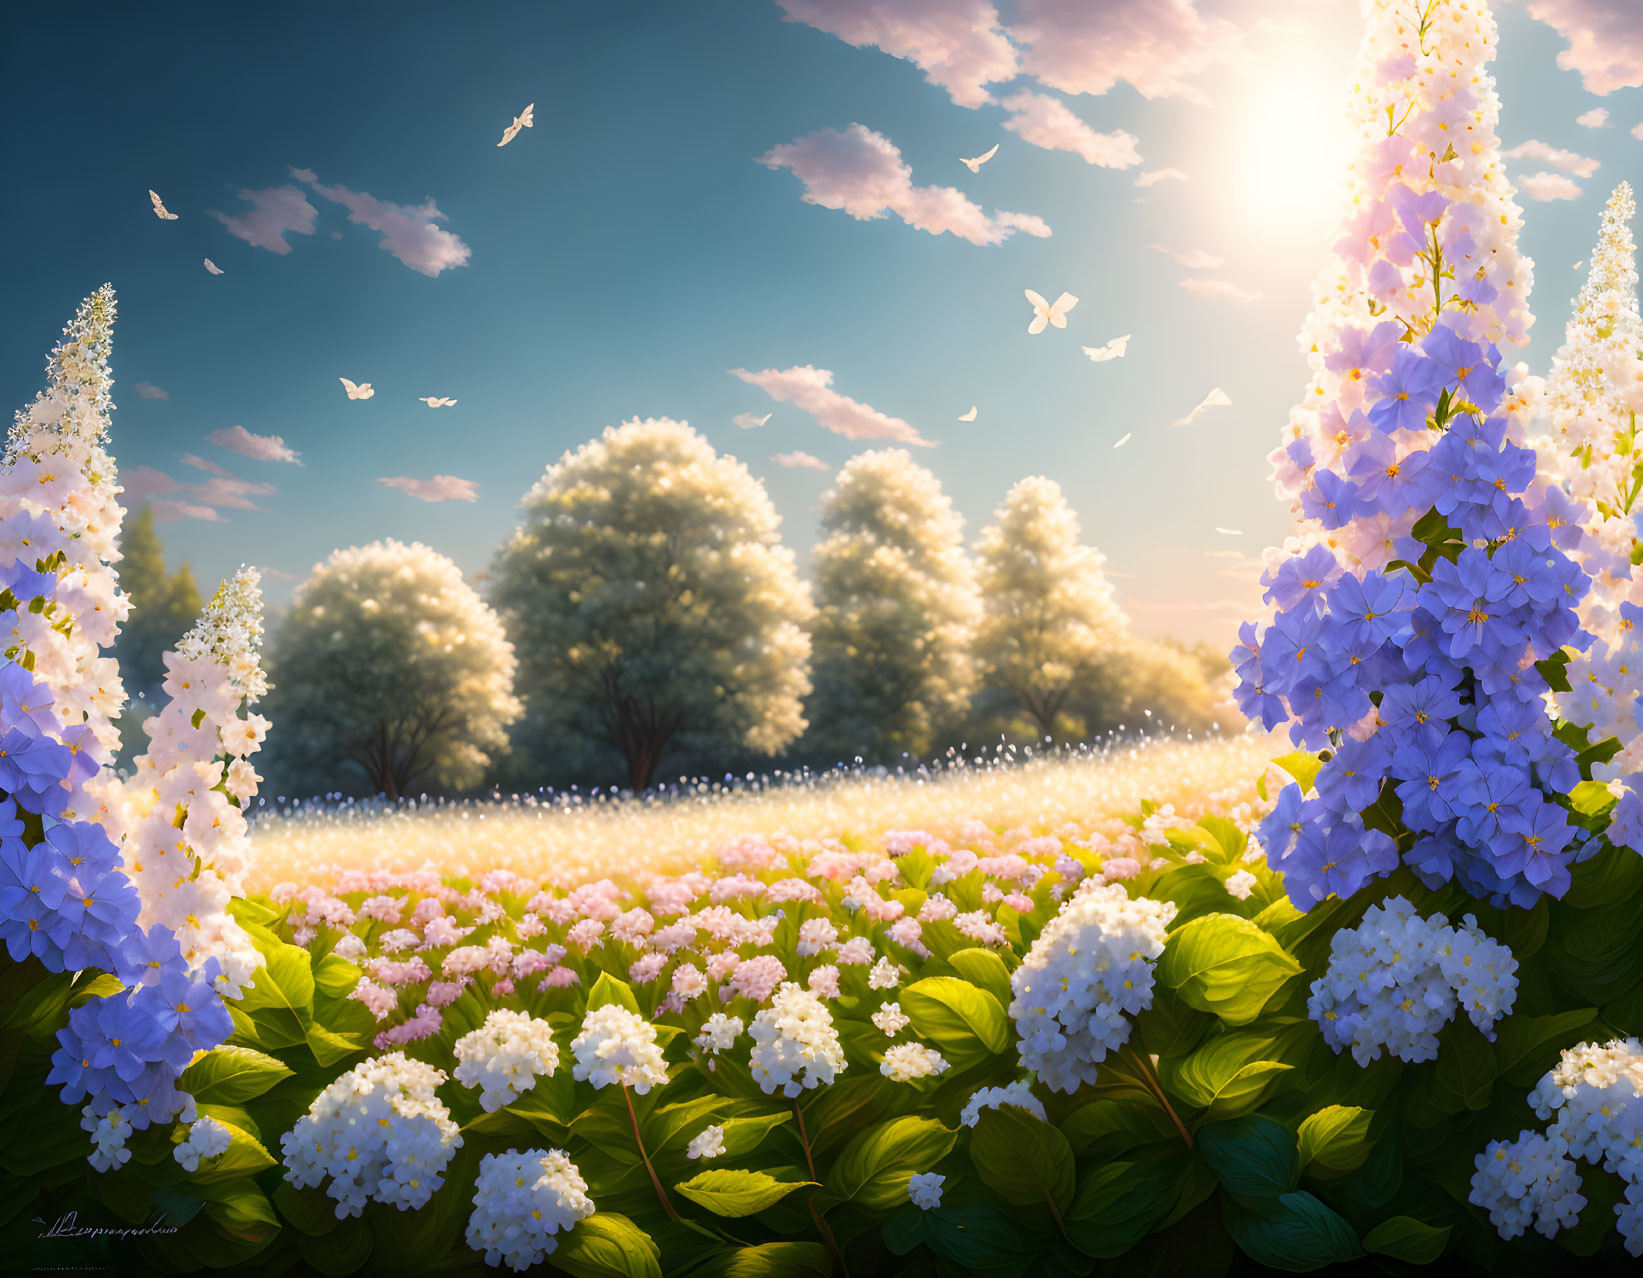 Tranquil landscape with blooming hydrangea bushes and trees under a sunny sky